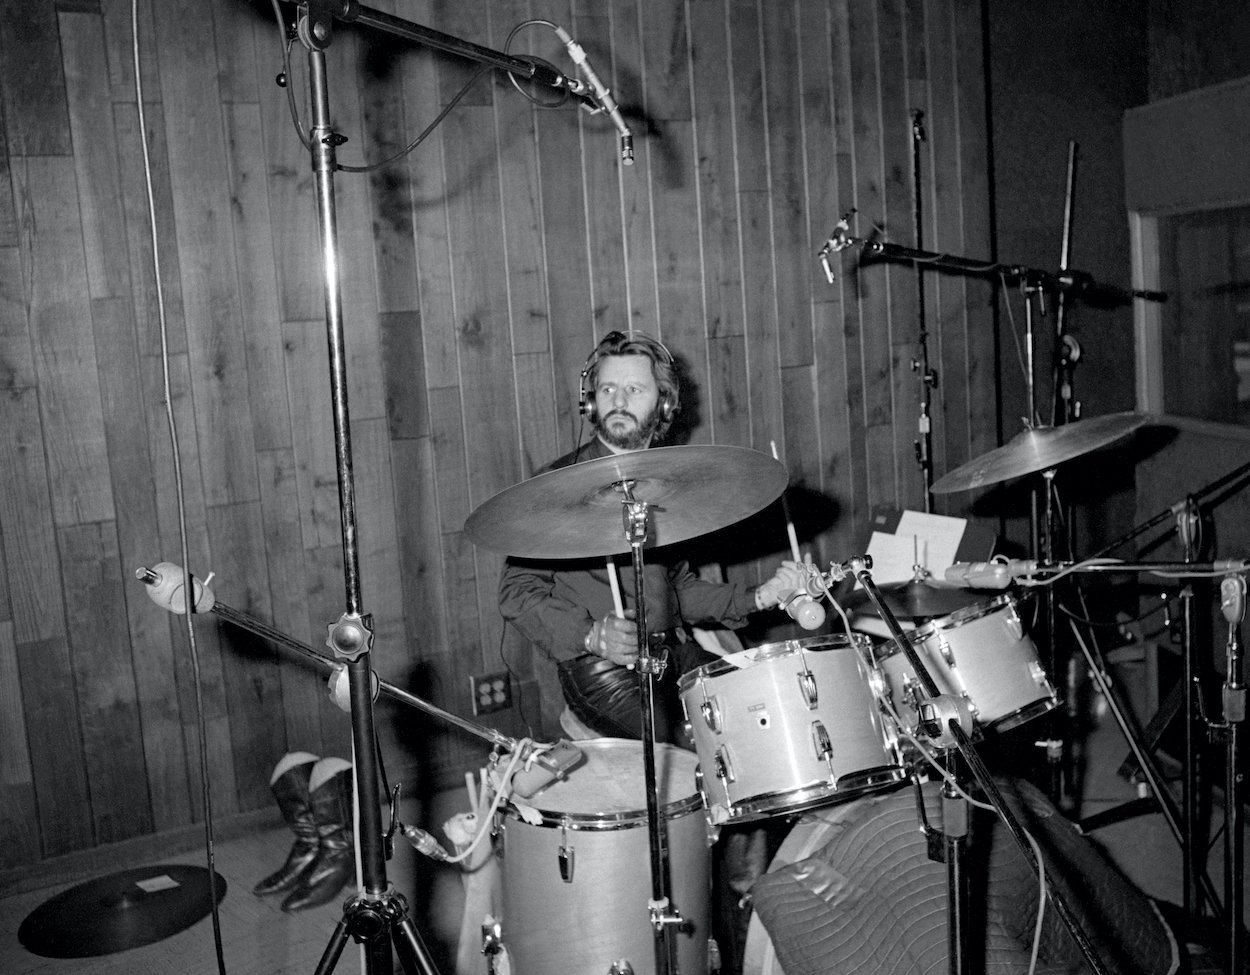 Ringo Starr, who in 2002 entered one hall of fame the other Beatles never will, plays drums during a 1985 recording session.